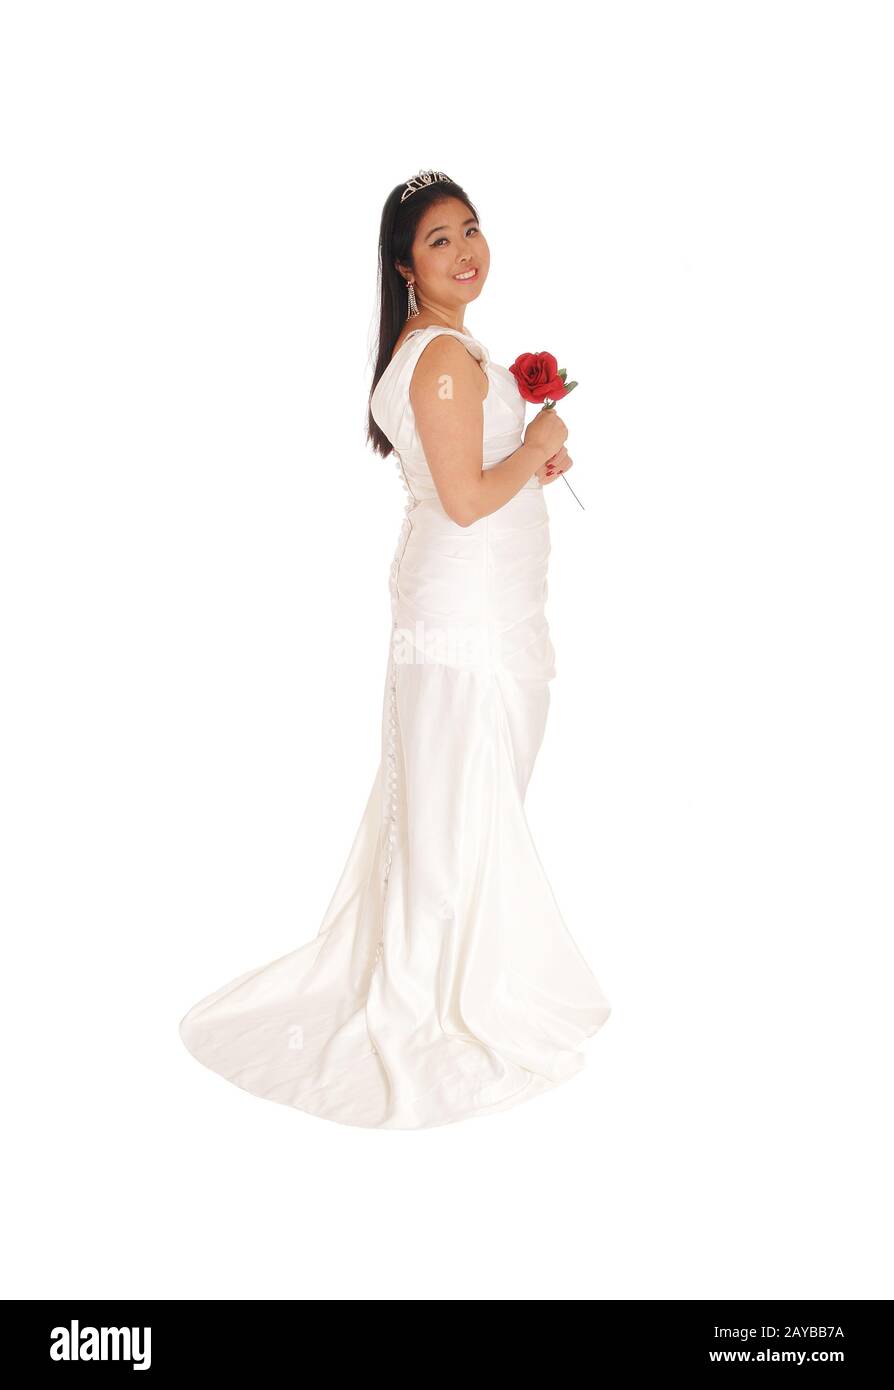 Lovely bride standing in a white gown with red rose Stock Photo